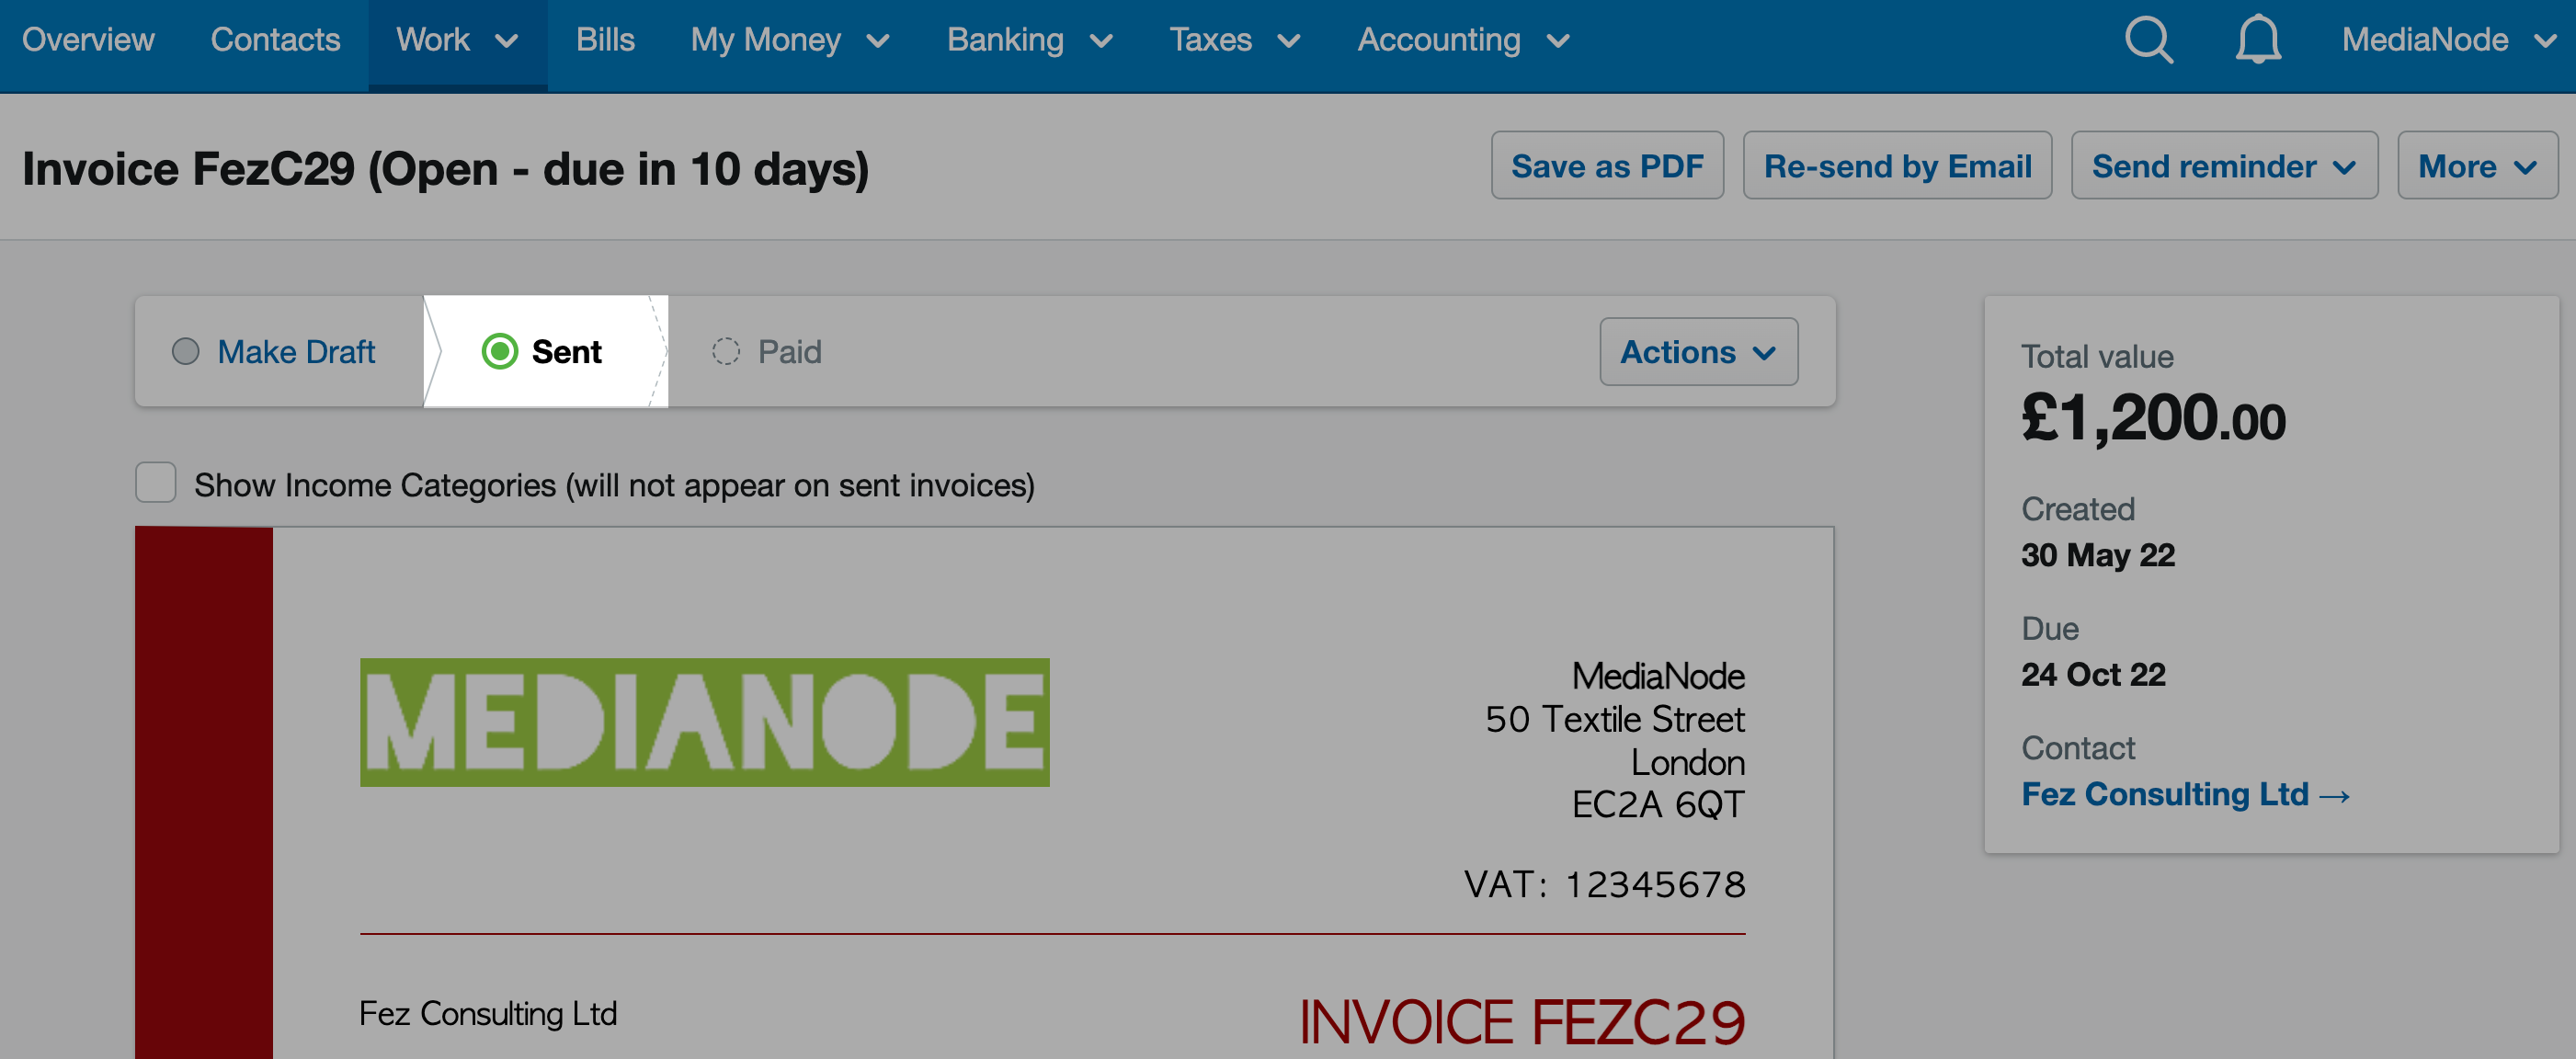 Screenshot of the invoice with the 'Send' status highlighted